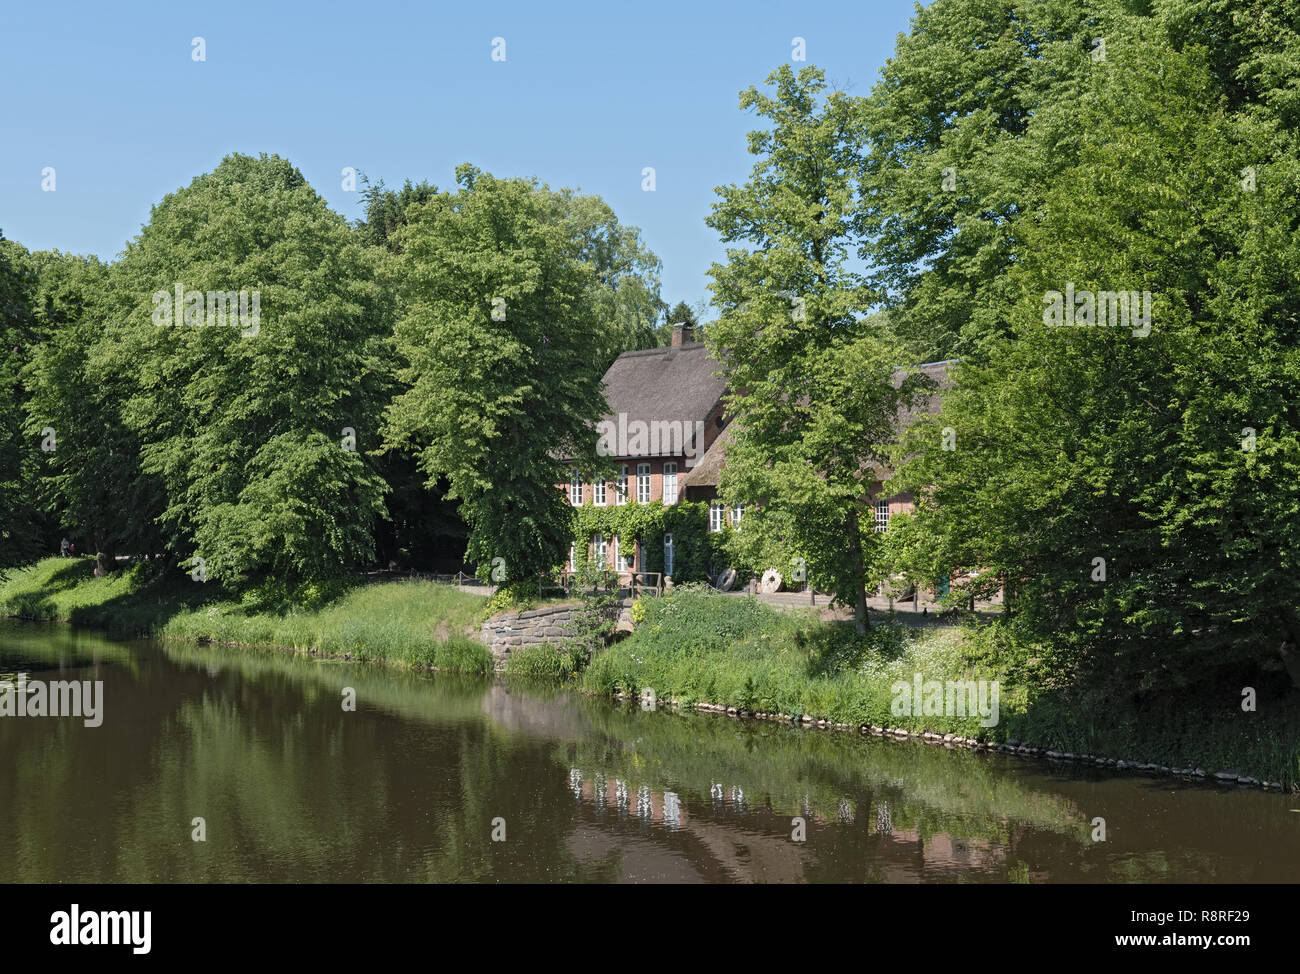 Ahrensburg High Resolution Stock Photography and Images - Alamy